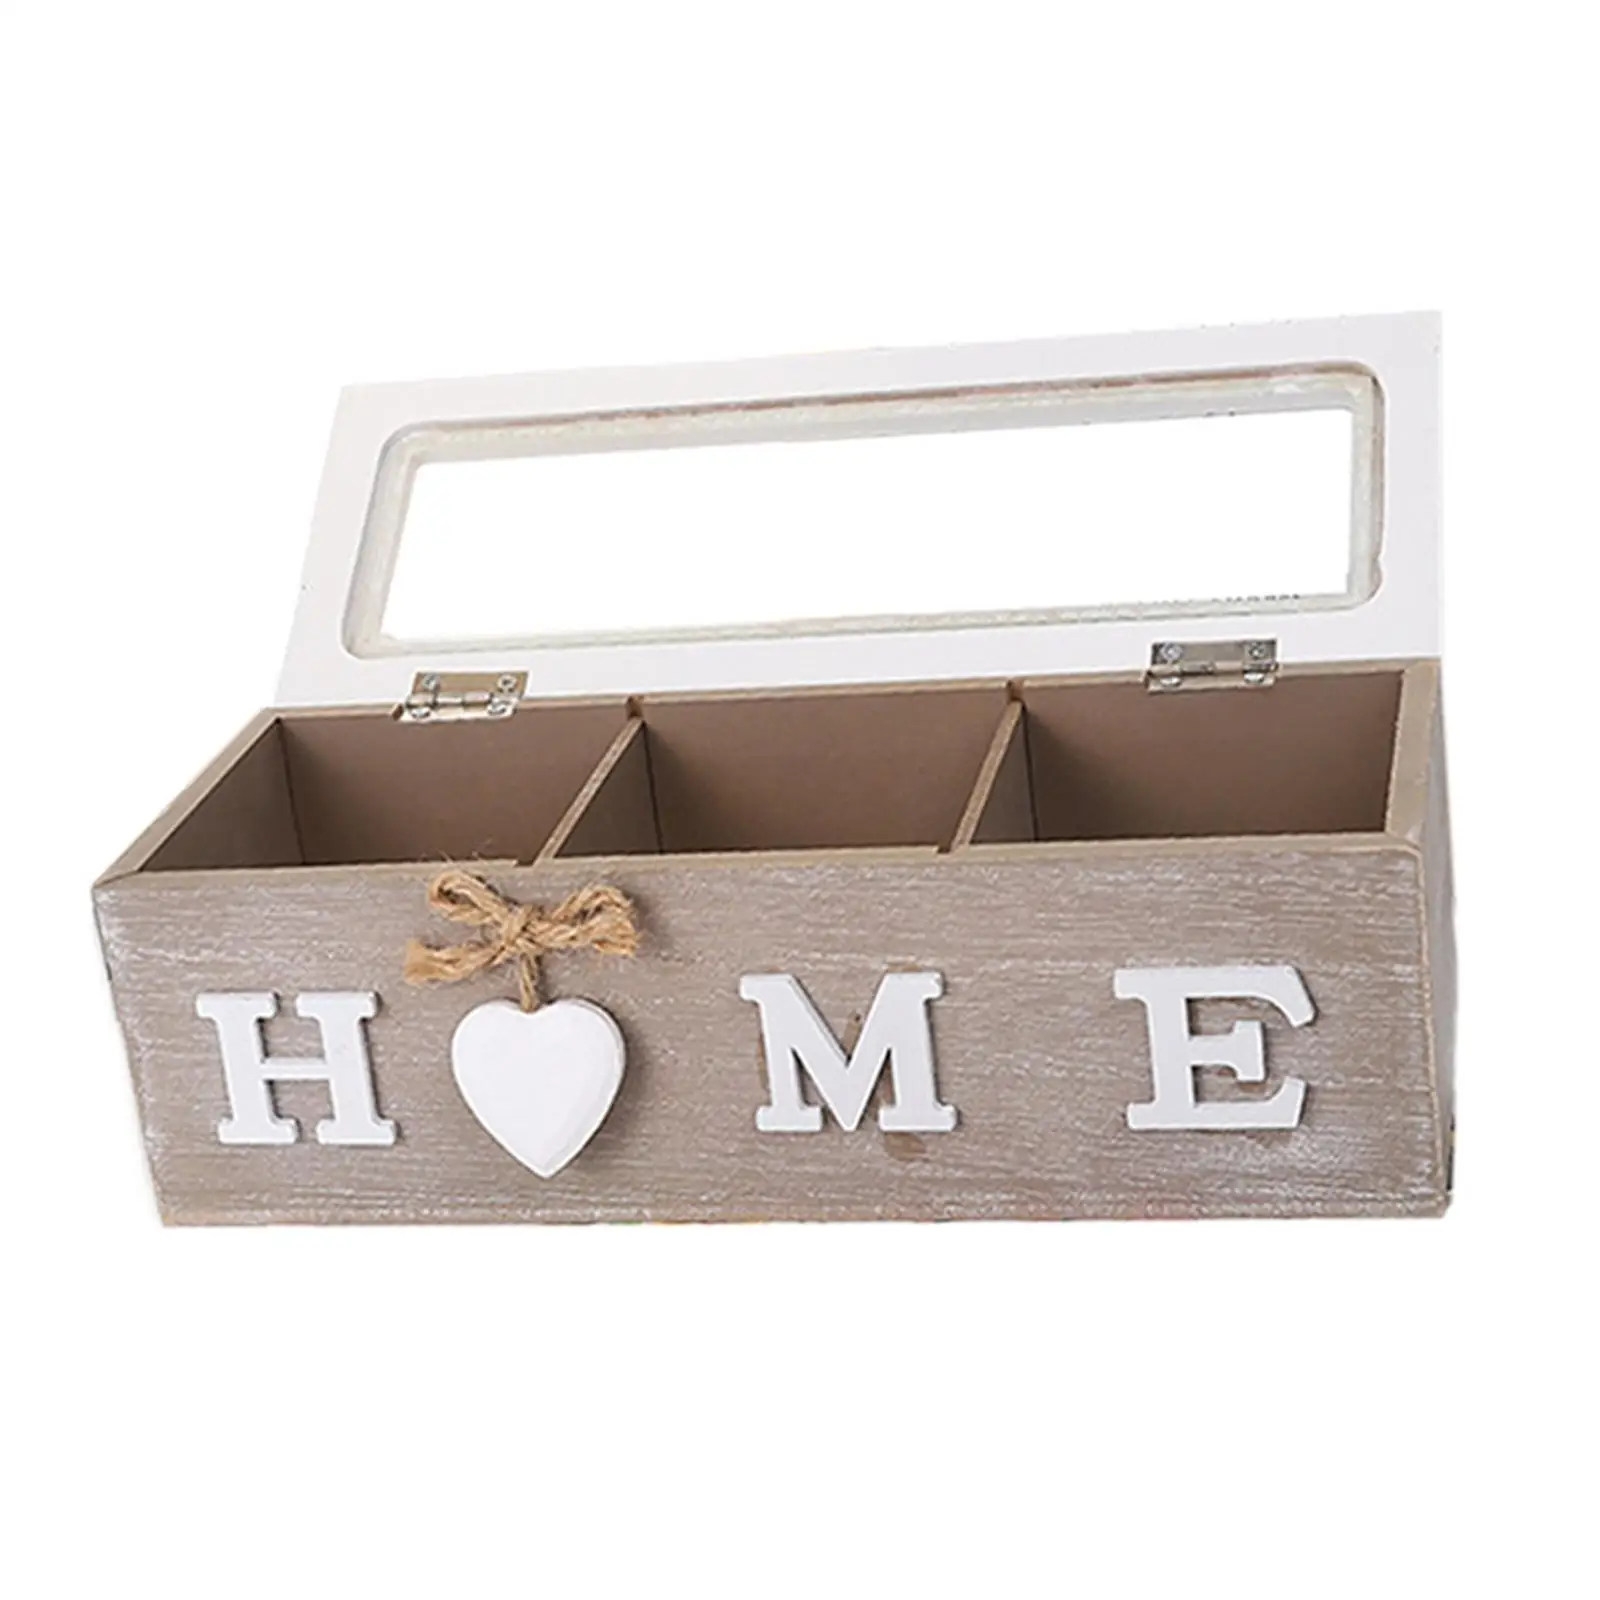 Wooden Tea Storage Box Kitchen Organiser Desktop Container with Viewing Window Jewelery Box for Creamers Tea Bags Coffee Pods